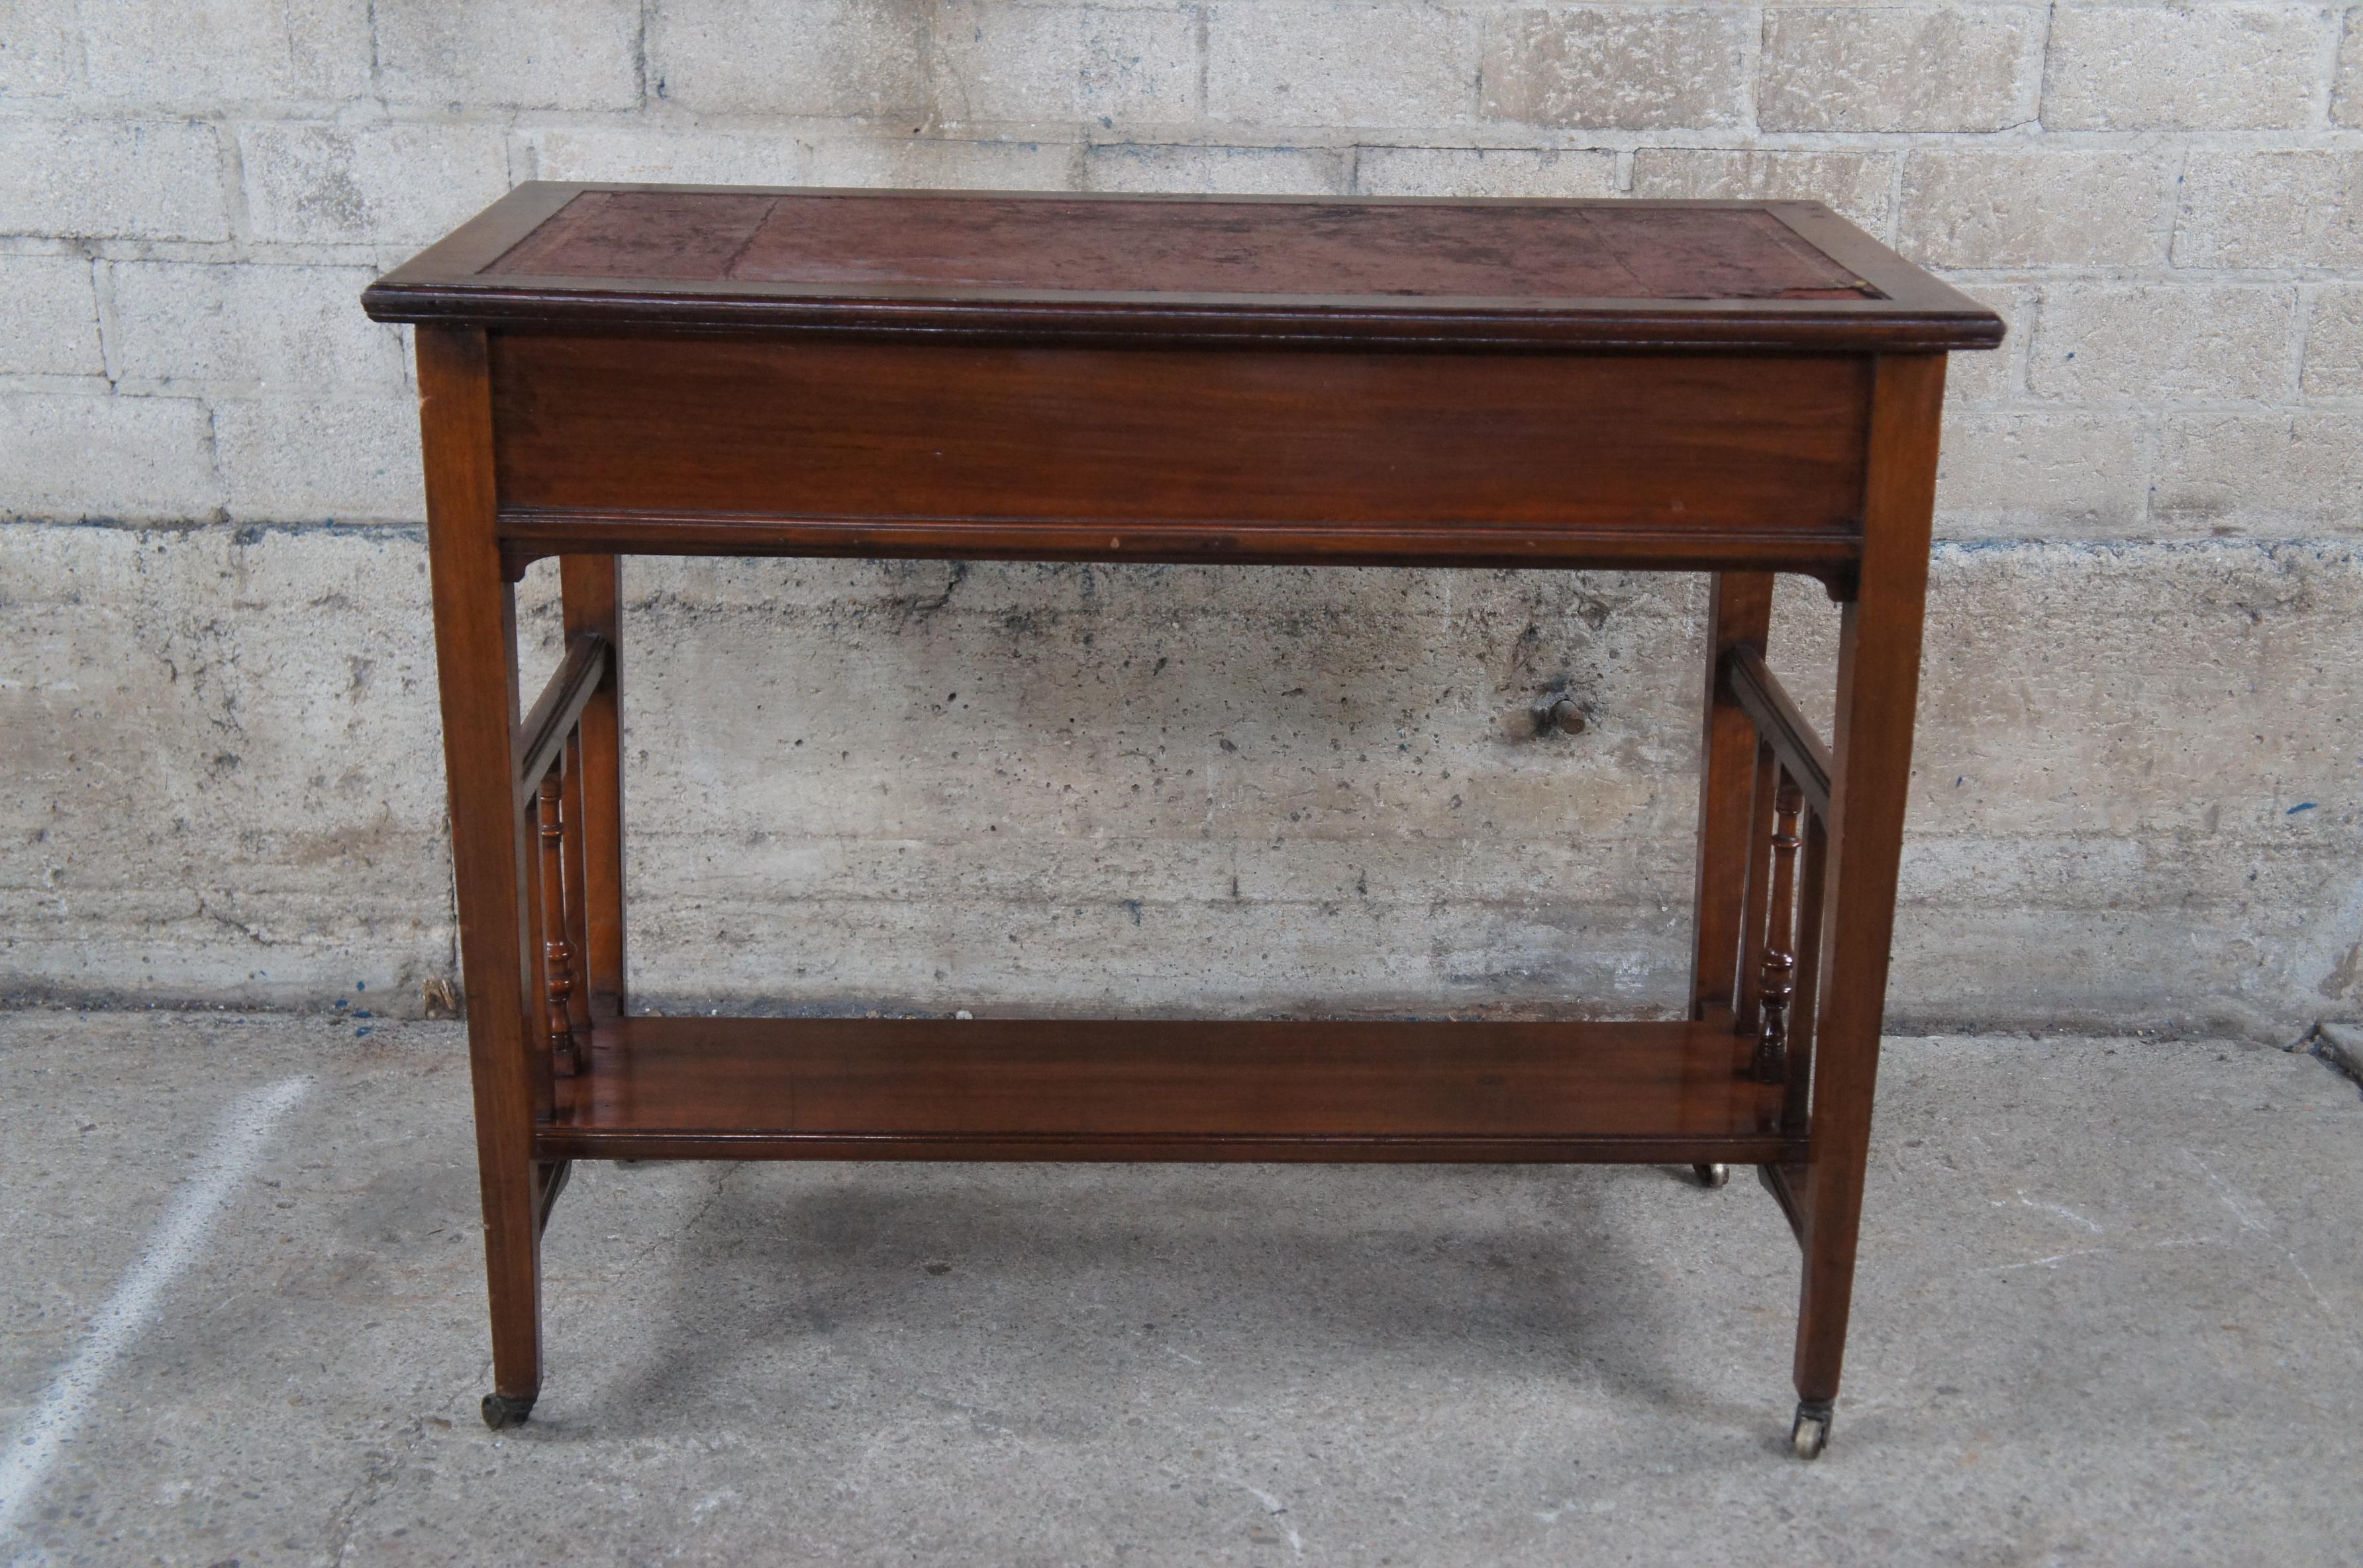 Antique Thomas Turner Manchester English Mahogany Writing Desk Library Table For Sale 5